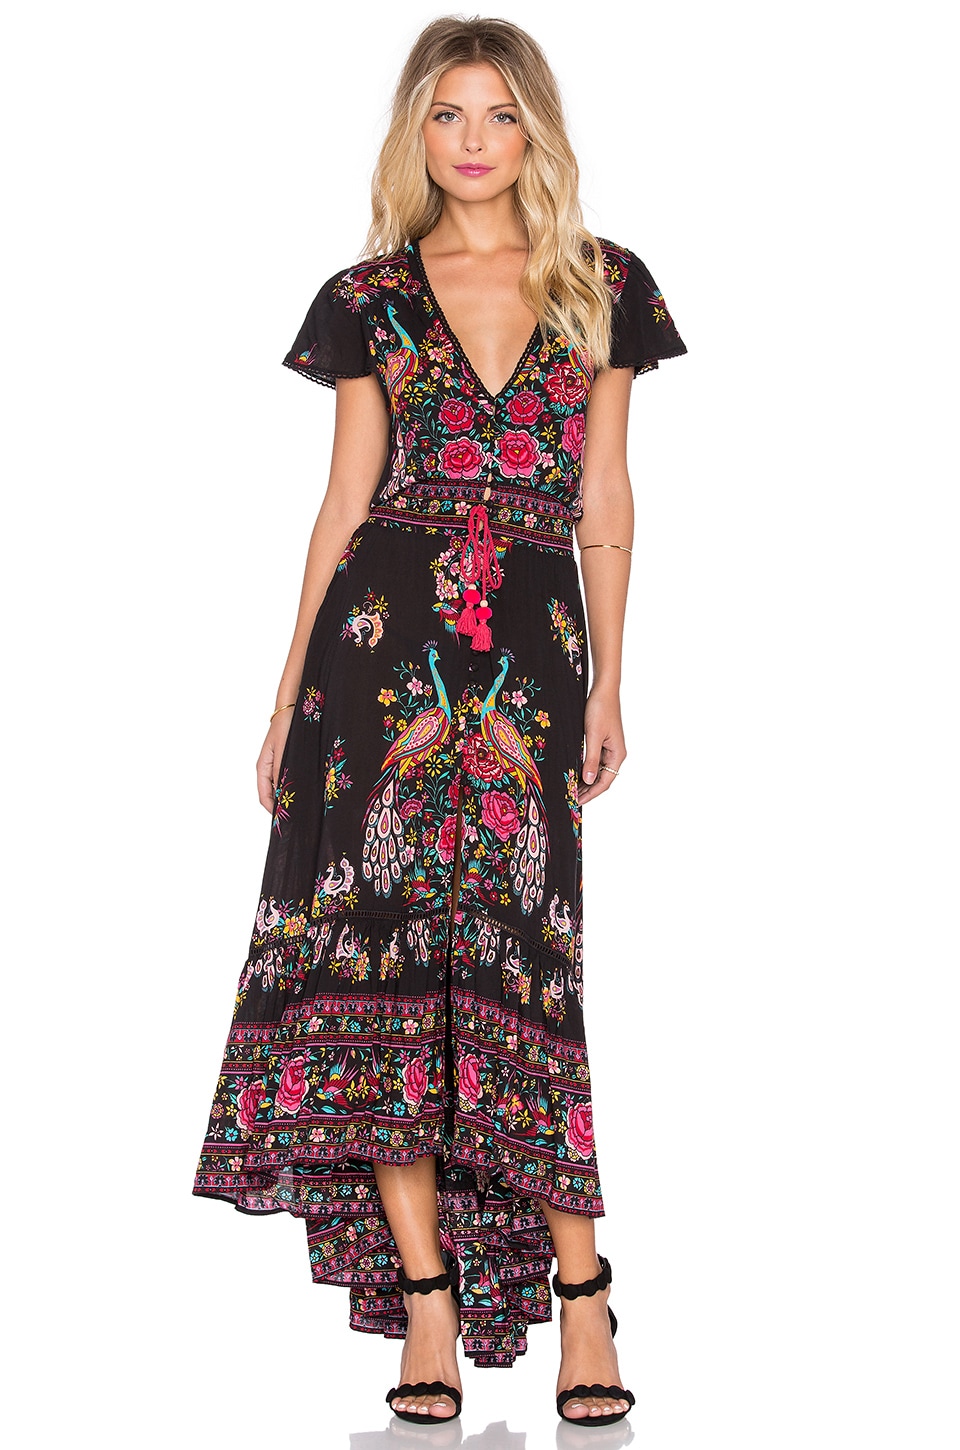 Spell & The Gypsy Collective Hotel Paradiso Maxi Dress in Jet | REVOLVE